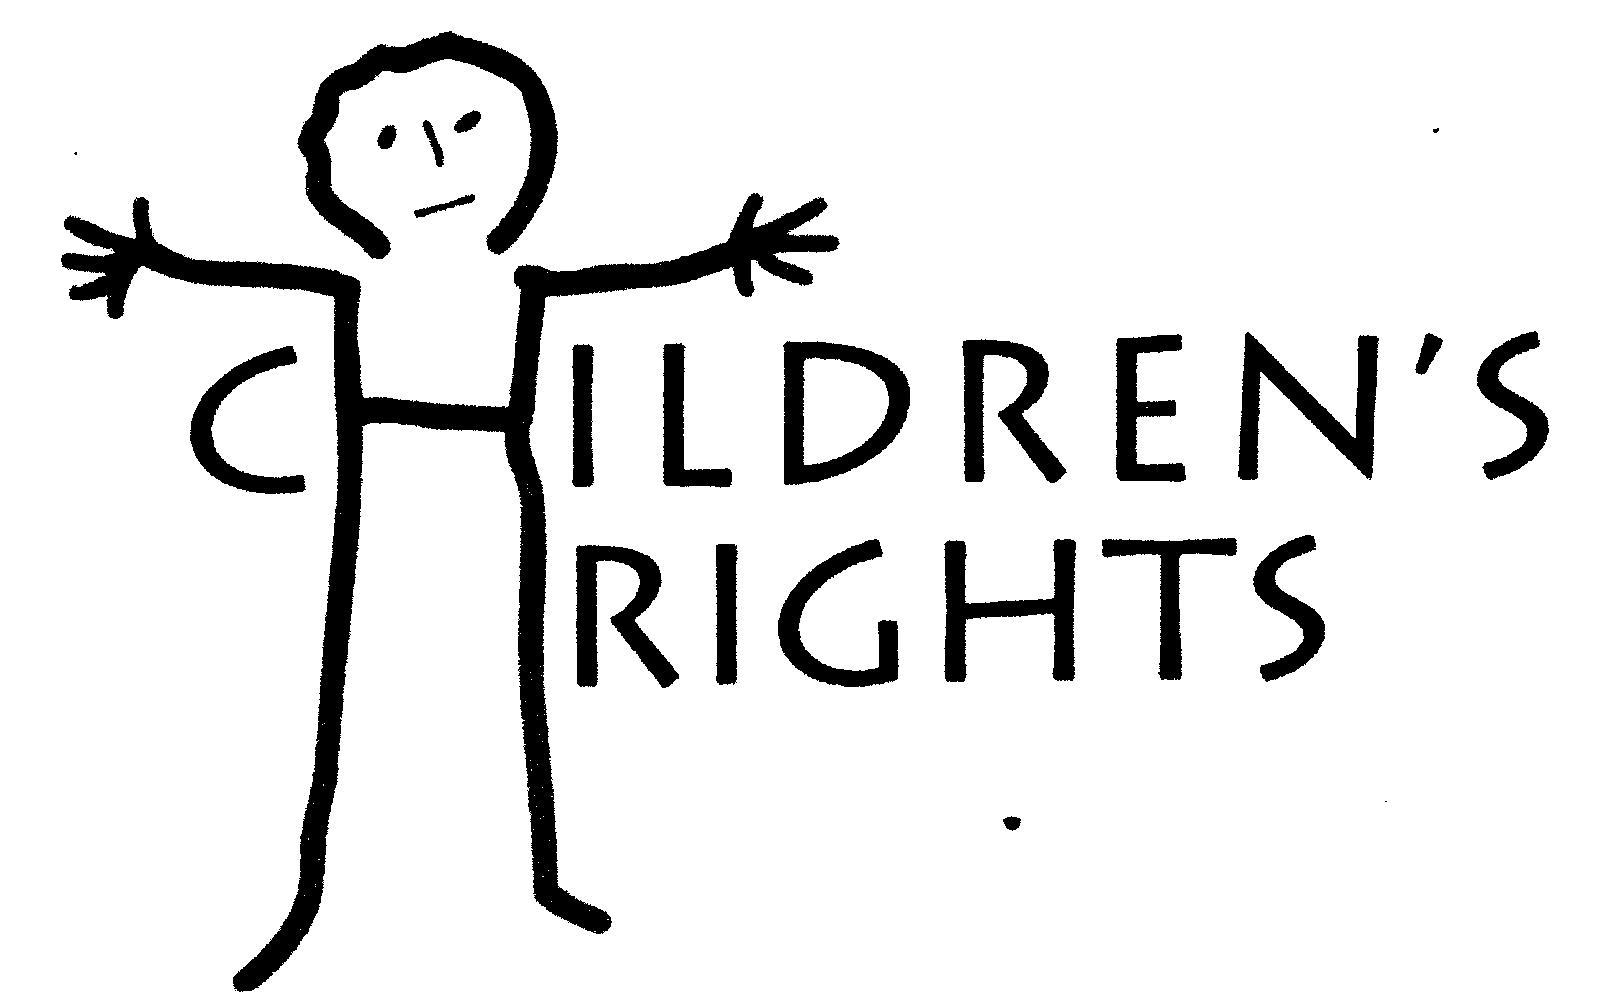 Explain on Child Rights